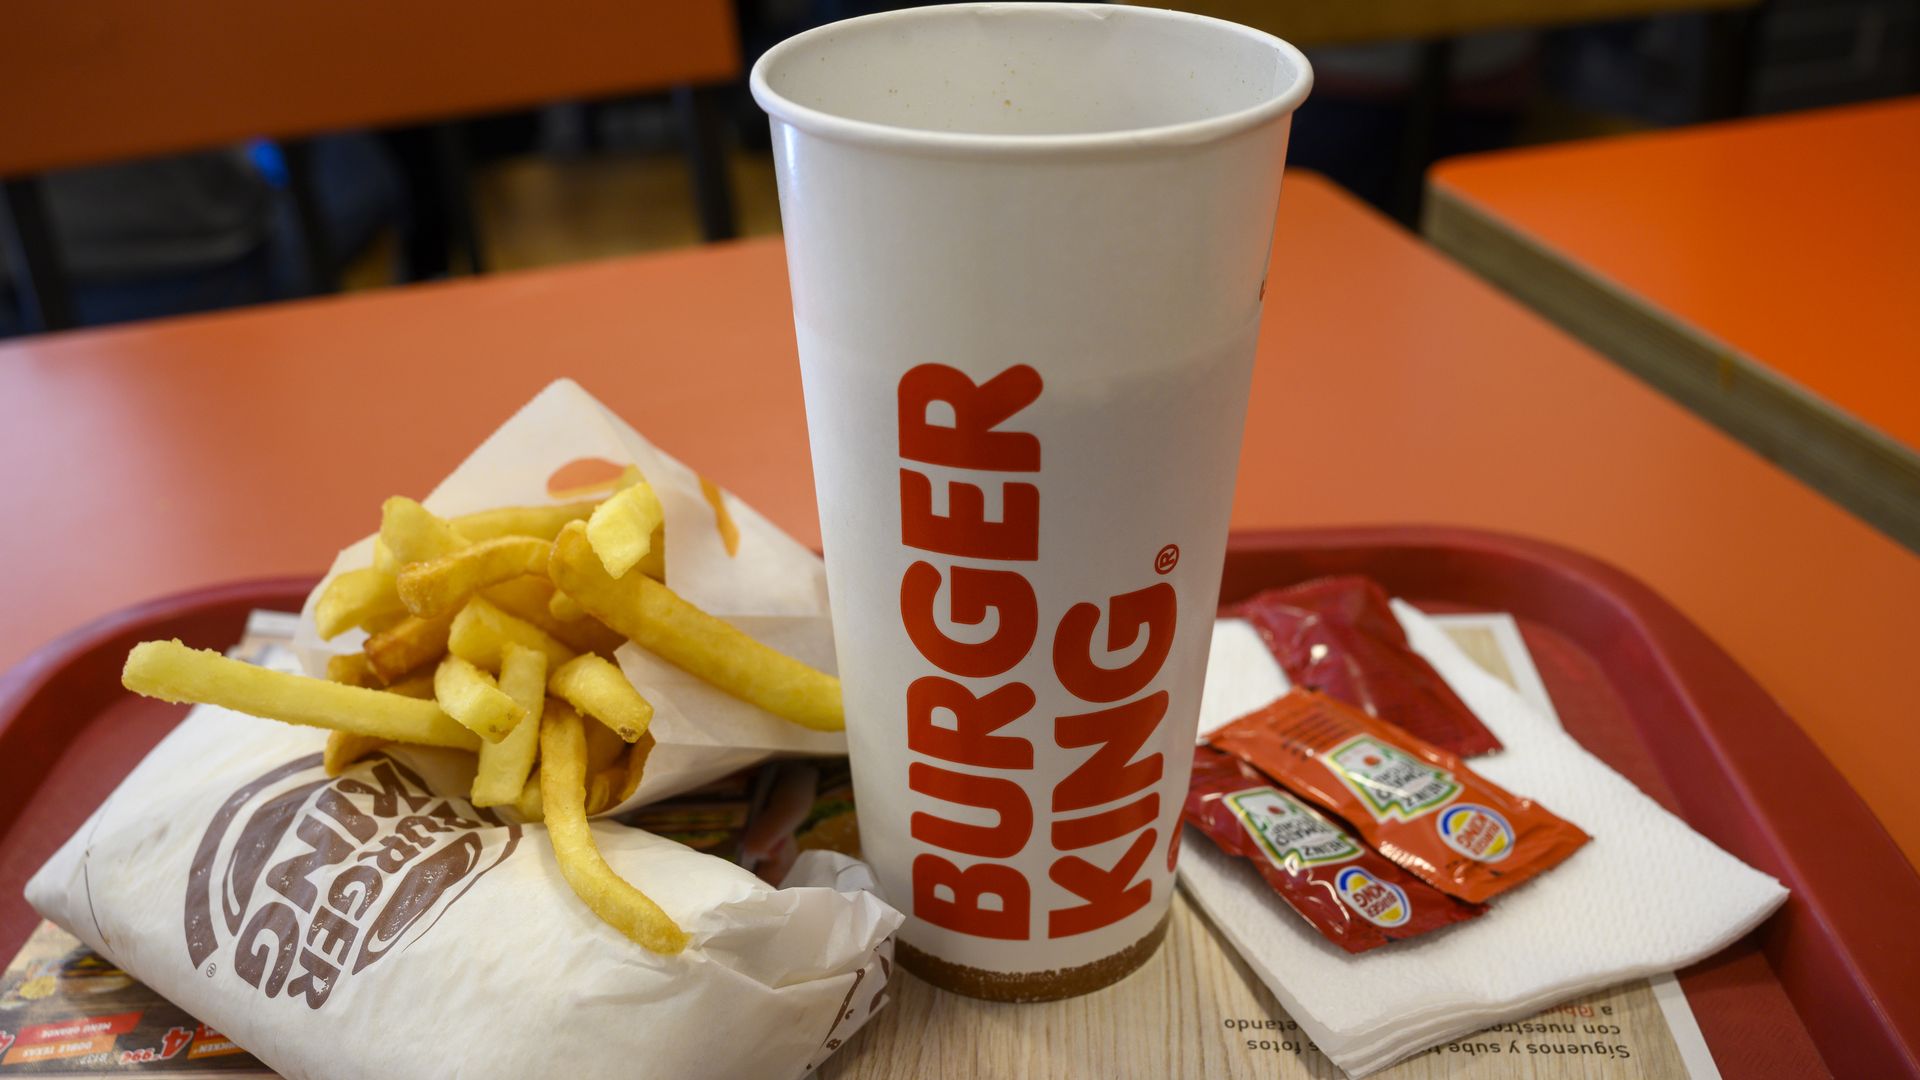 A Burger King meal in Madrid, Spain, in may 2019.